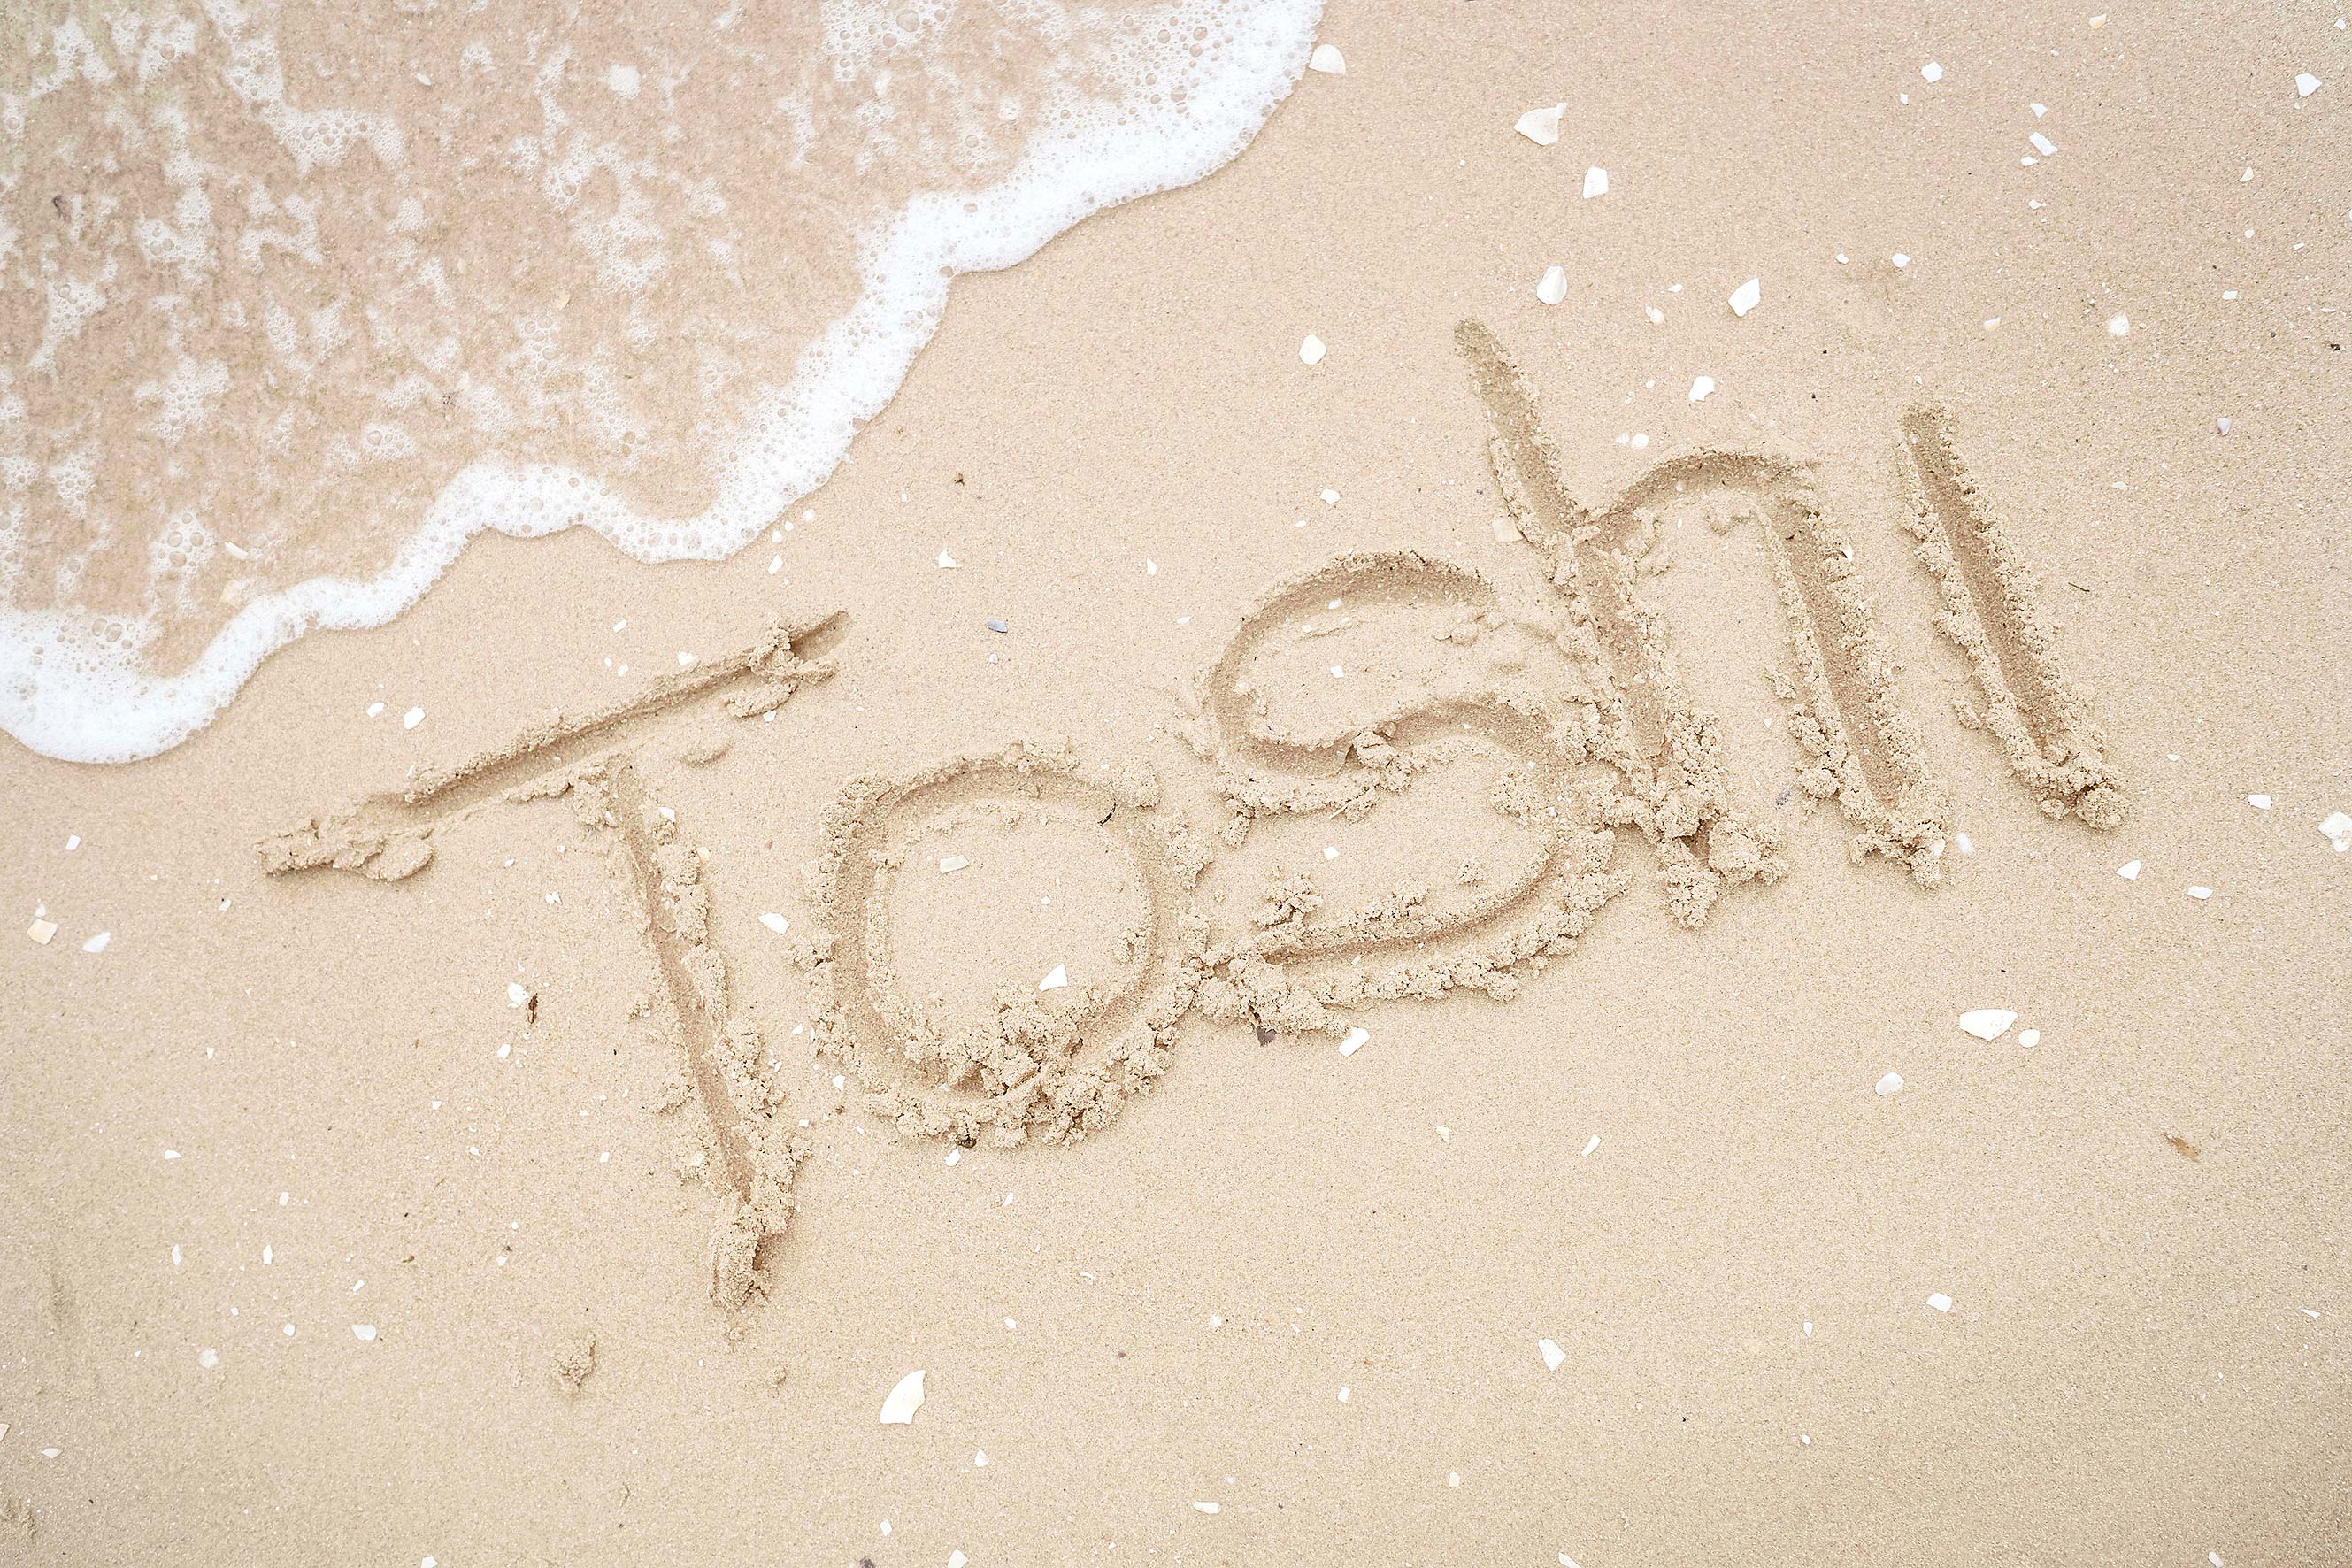 Toshi australian swimwear hats for every age and cute outfits